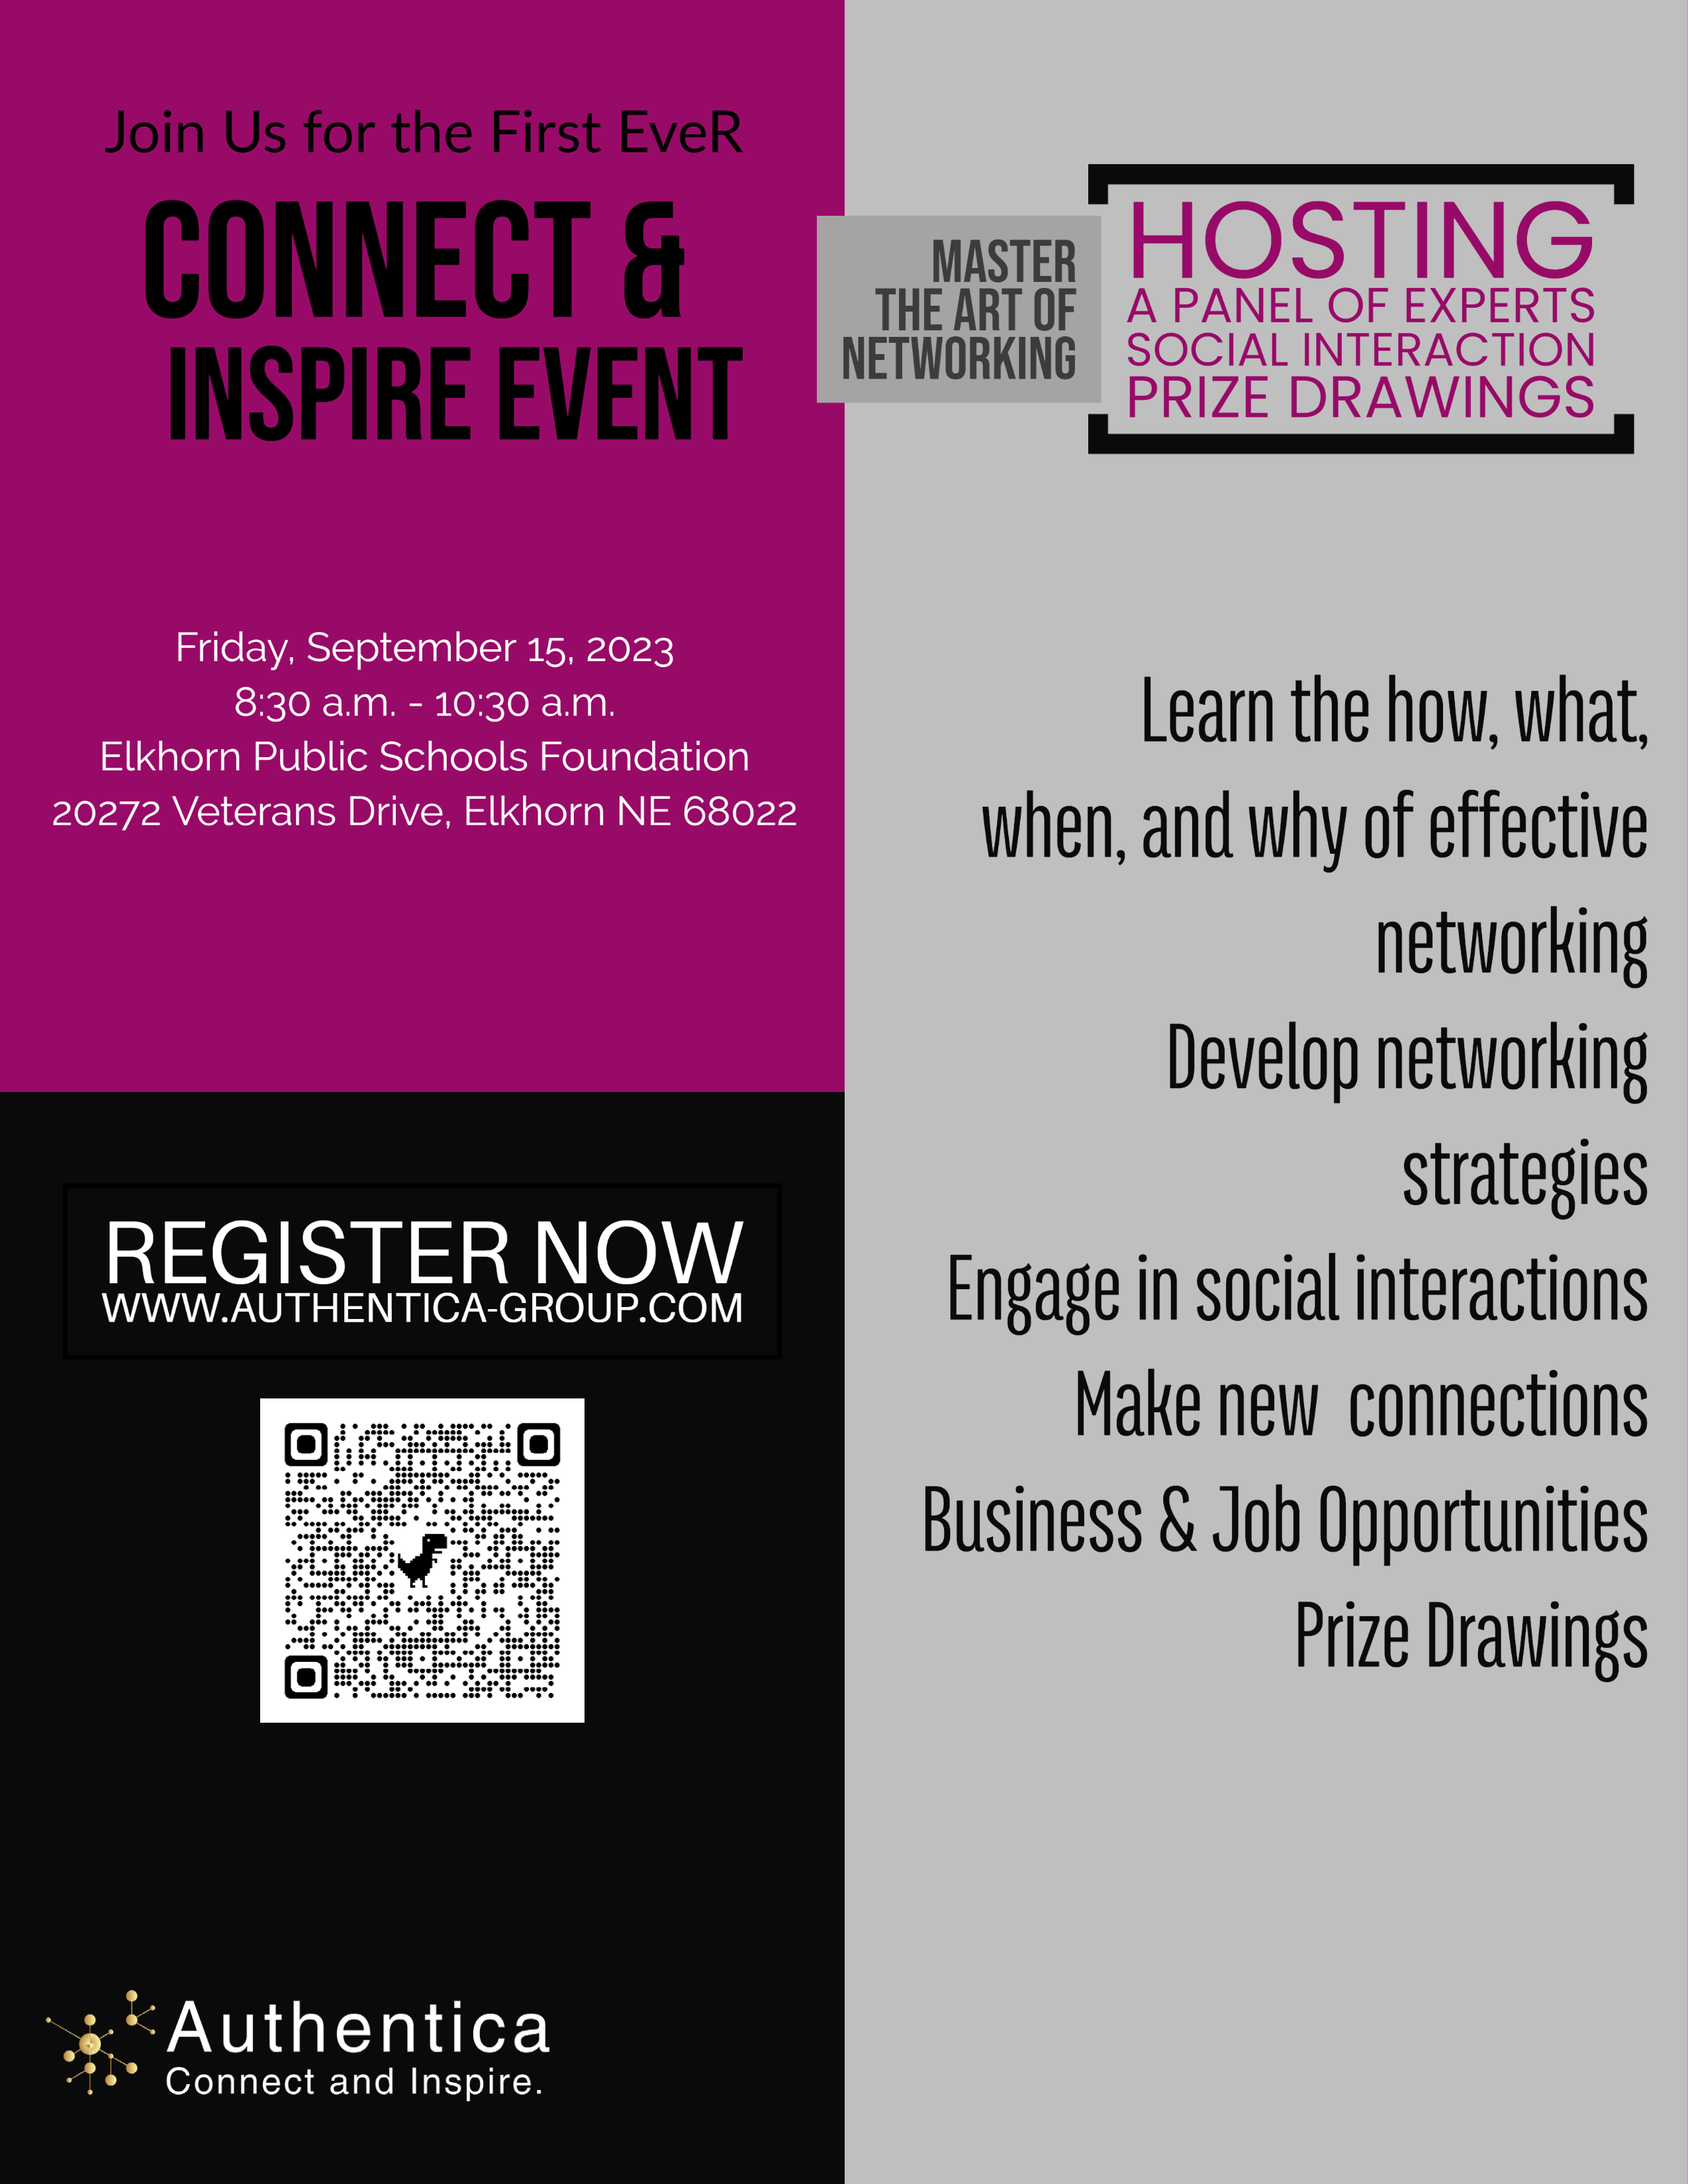 Authentica LLC “Connect & Inspire” Mastering the Art of Networking Event on a purple, black, and grey background.